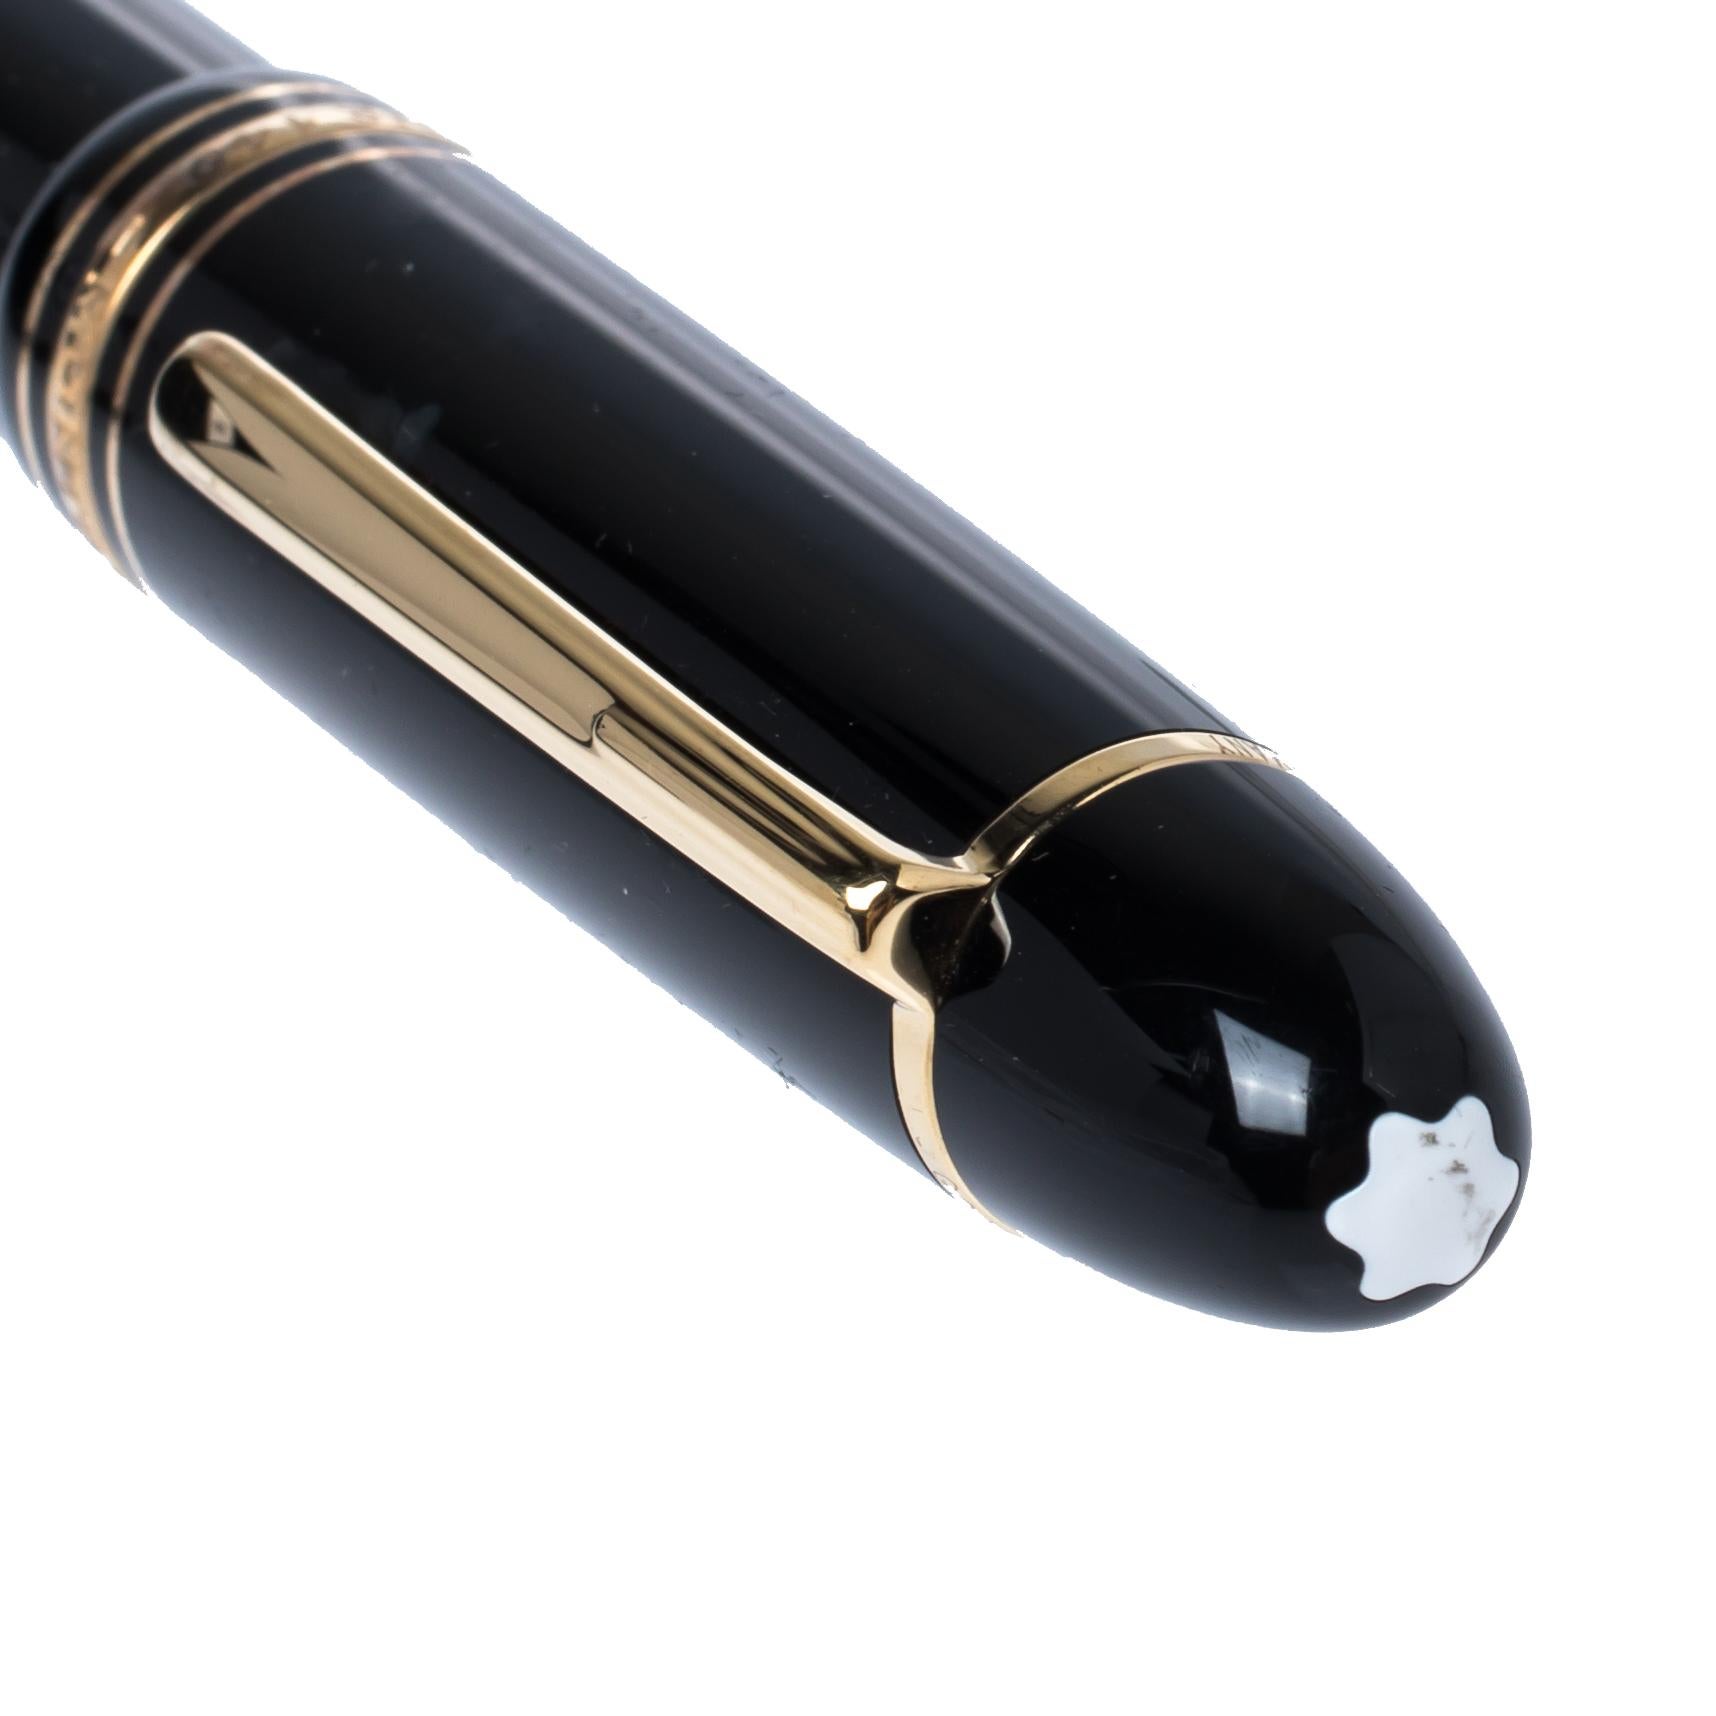 This Montblanc Meisterstruck fountain pen is crafted from famous black precious resin with gold-tone details. The pen comes with the iconic star emblem at the top of the cap and an 18k gold nib. The pen is complete with signature engravings on the